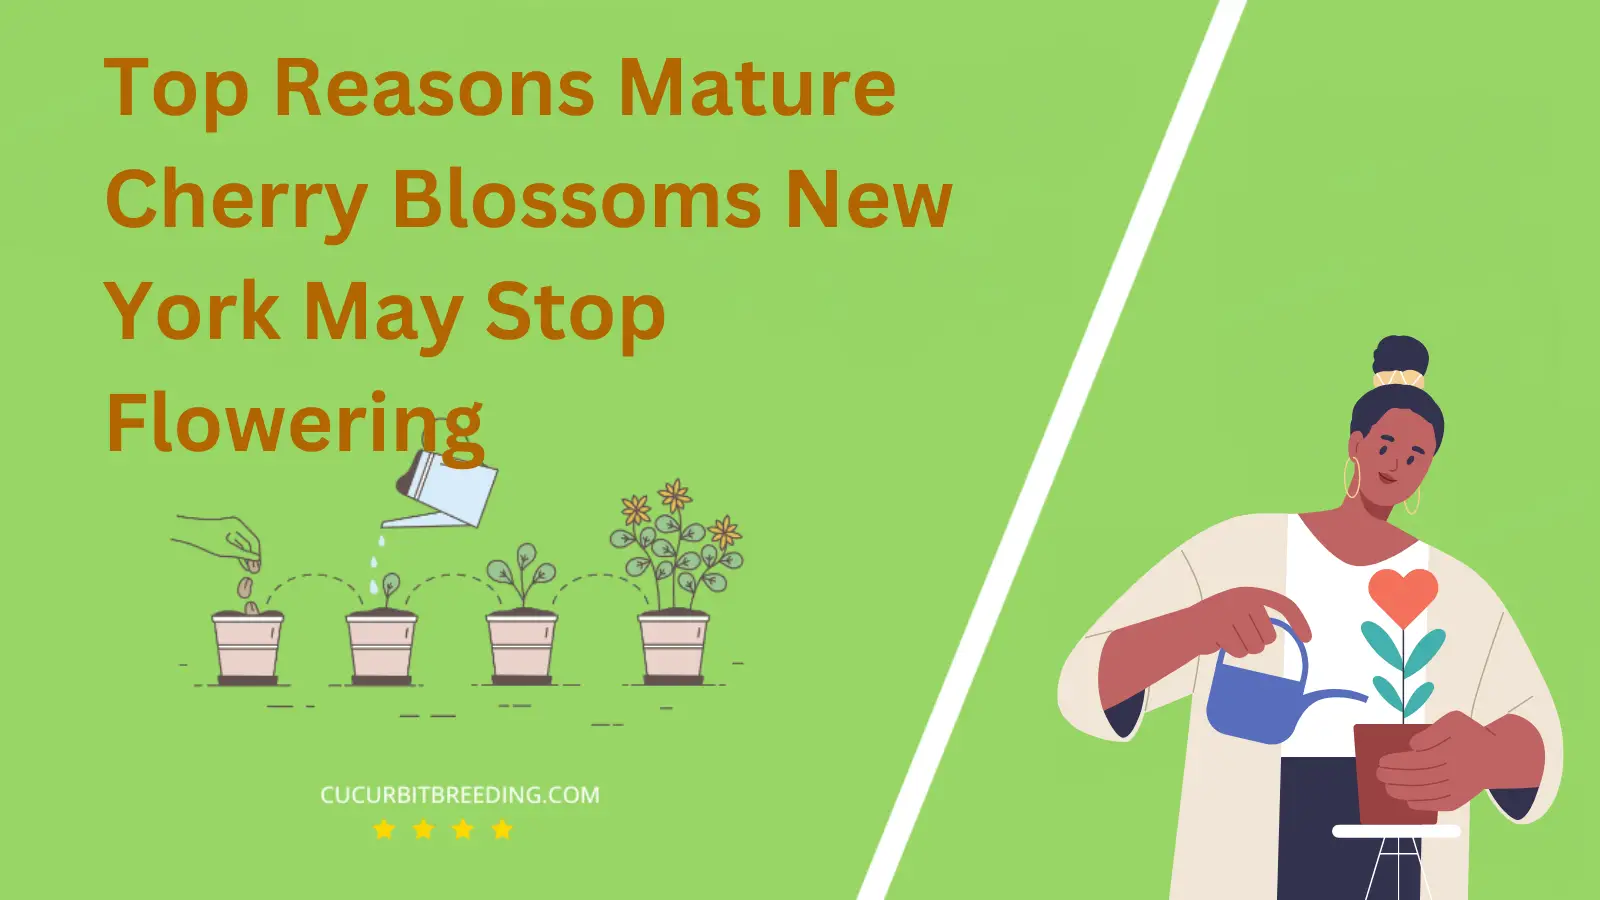 Top Reasons Mature Cherry Blossoms New York May Stop Flowering